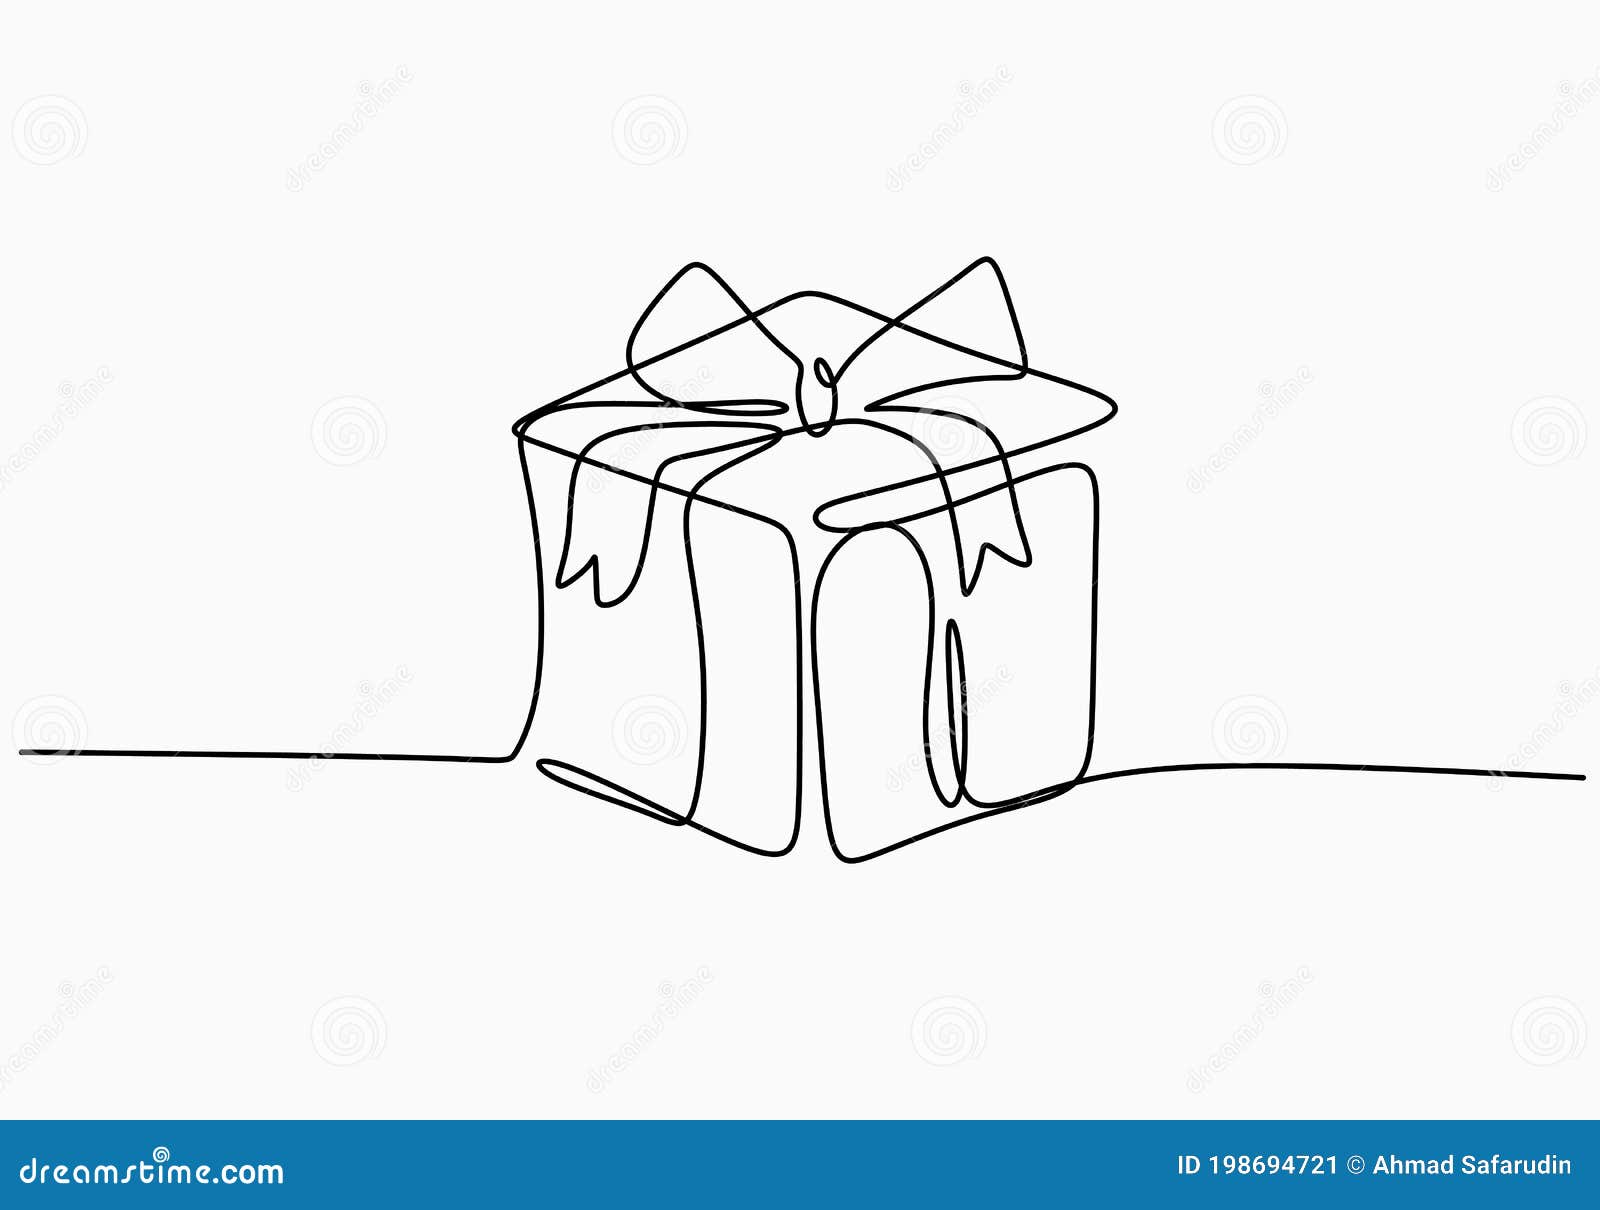 Continuous Line Drawing Of Gift Box With Ribbon Bow